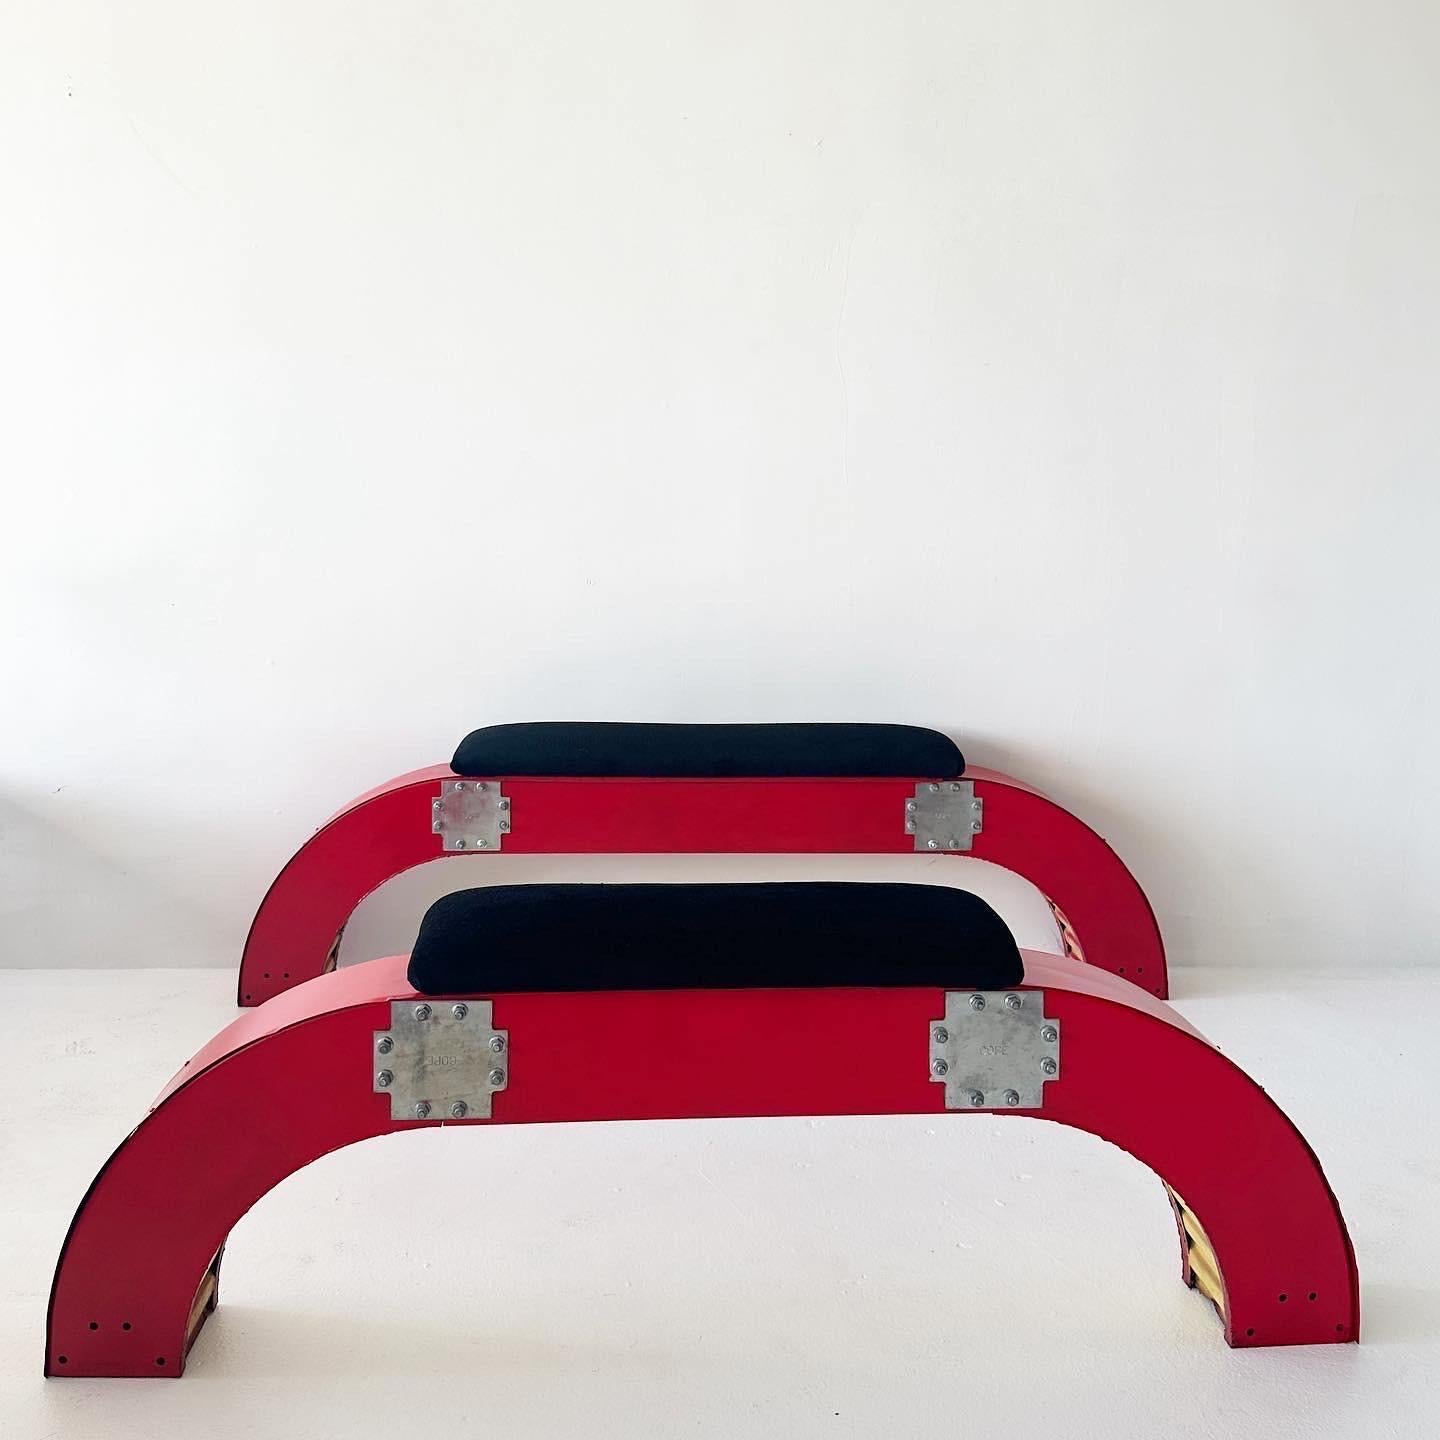 Two waterfall industrial metal benches made in the 1990s for an underground dance music record store on Melrose Avenue in Los Angeles called Beat Non-Stop.

These have been repainted red and the seat upholstery has been redone with a beautiful black